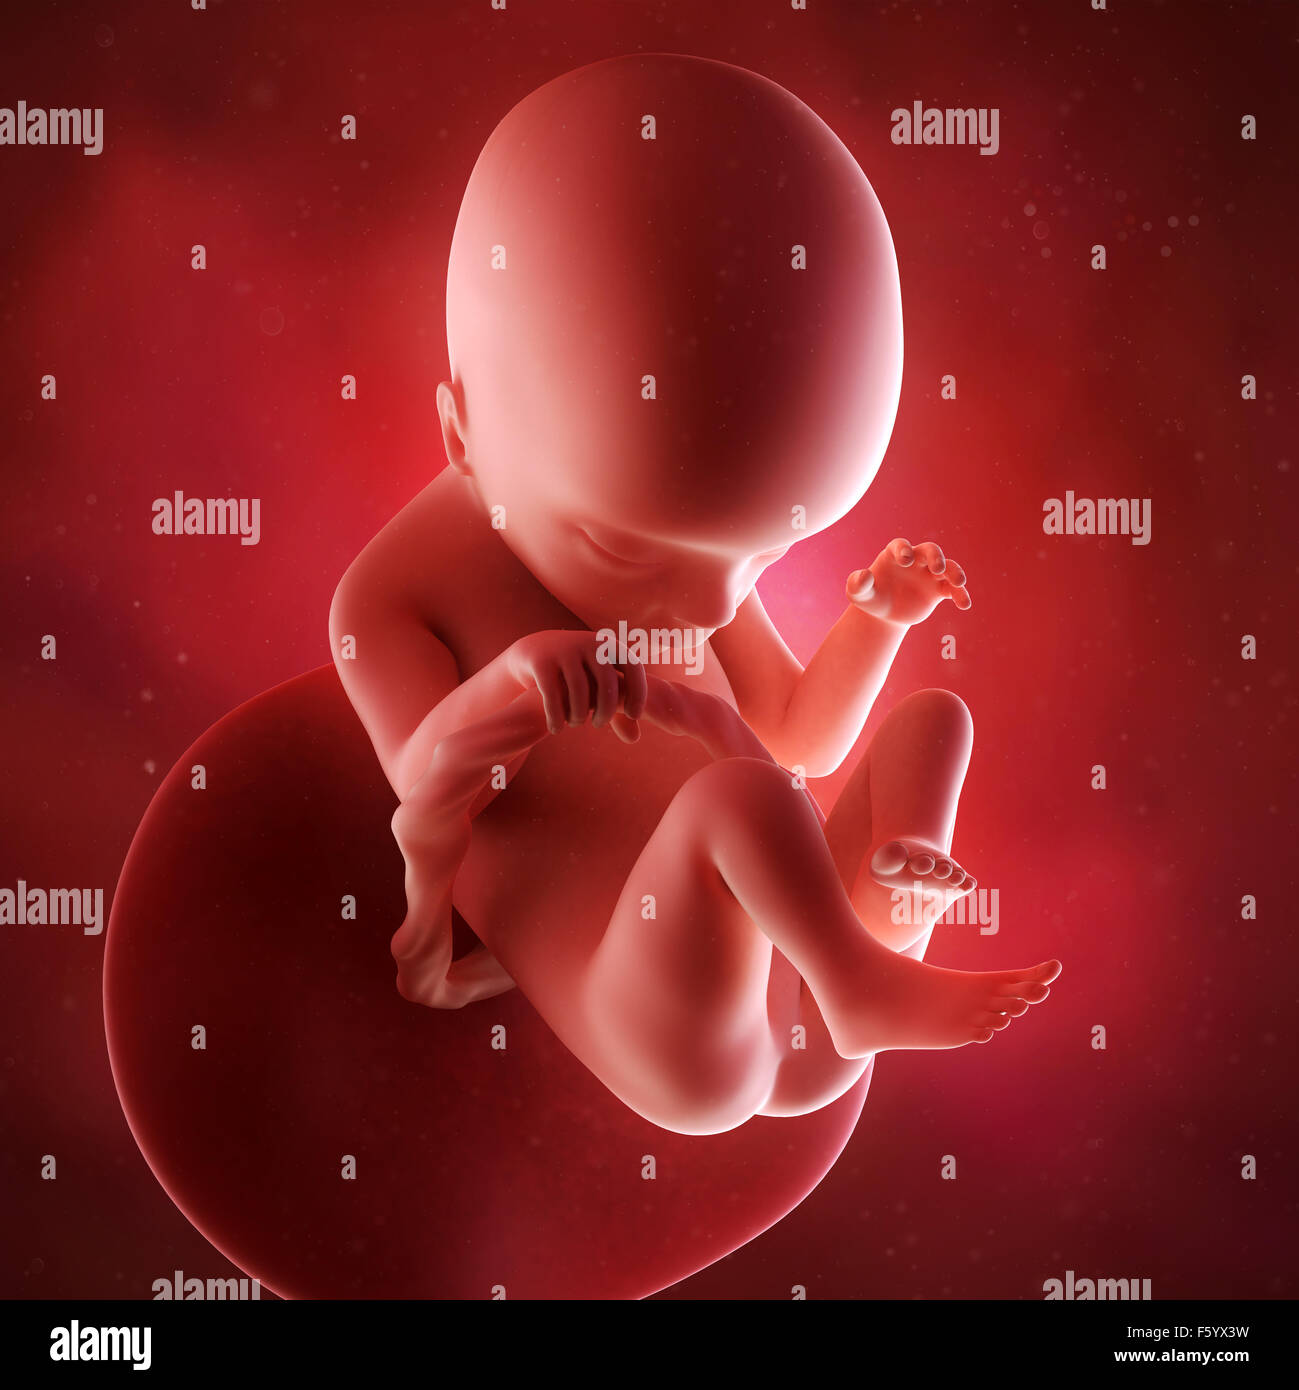 medical accurate 3d illustration of a fetus week 18 Stock Photo